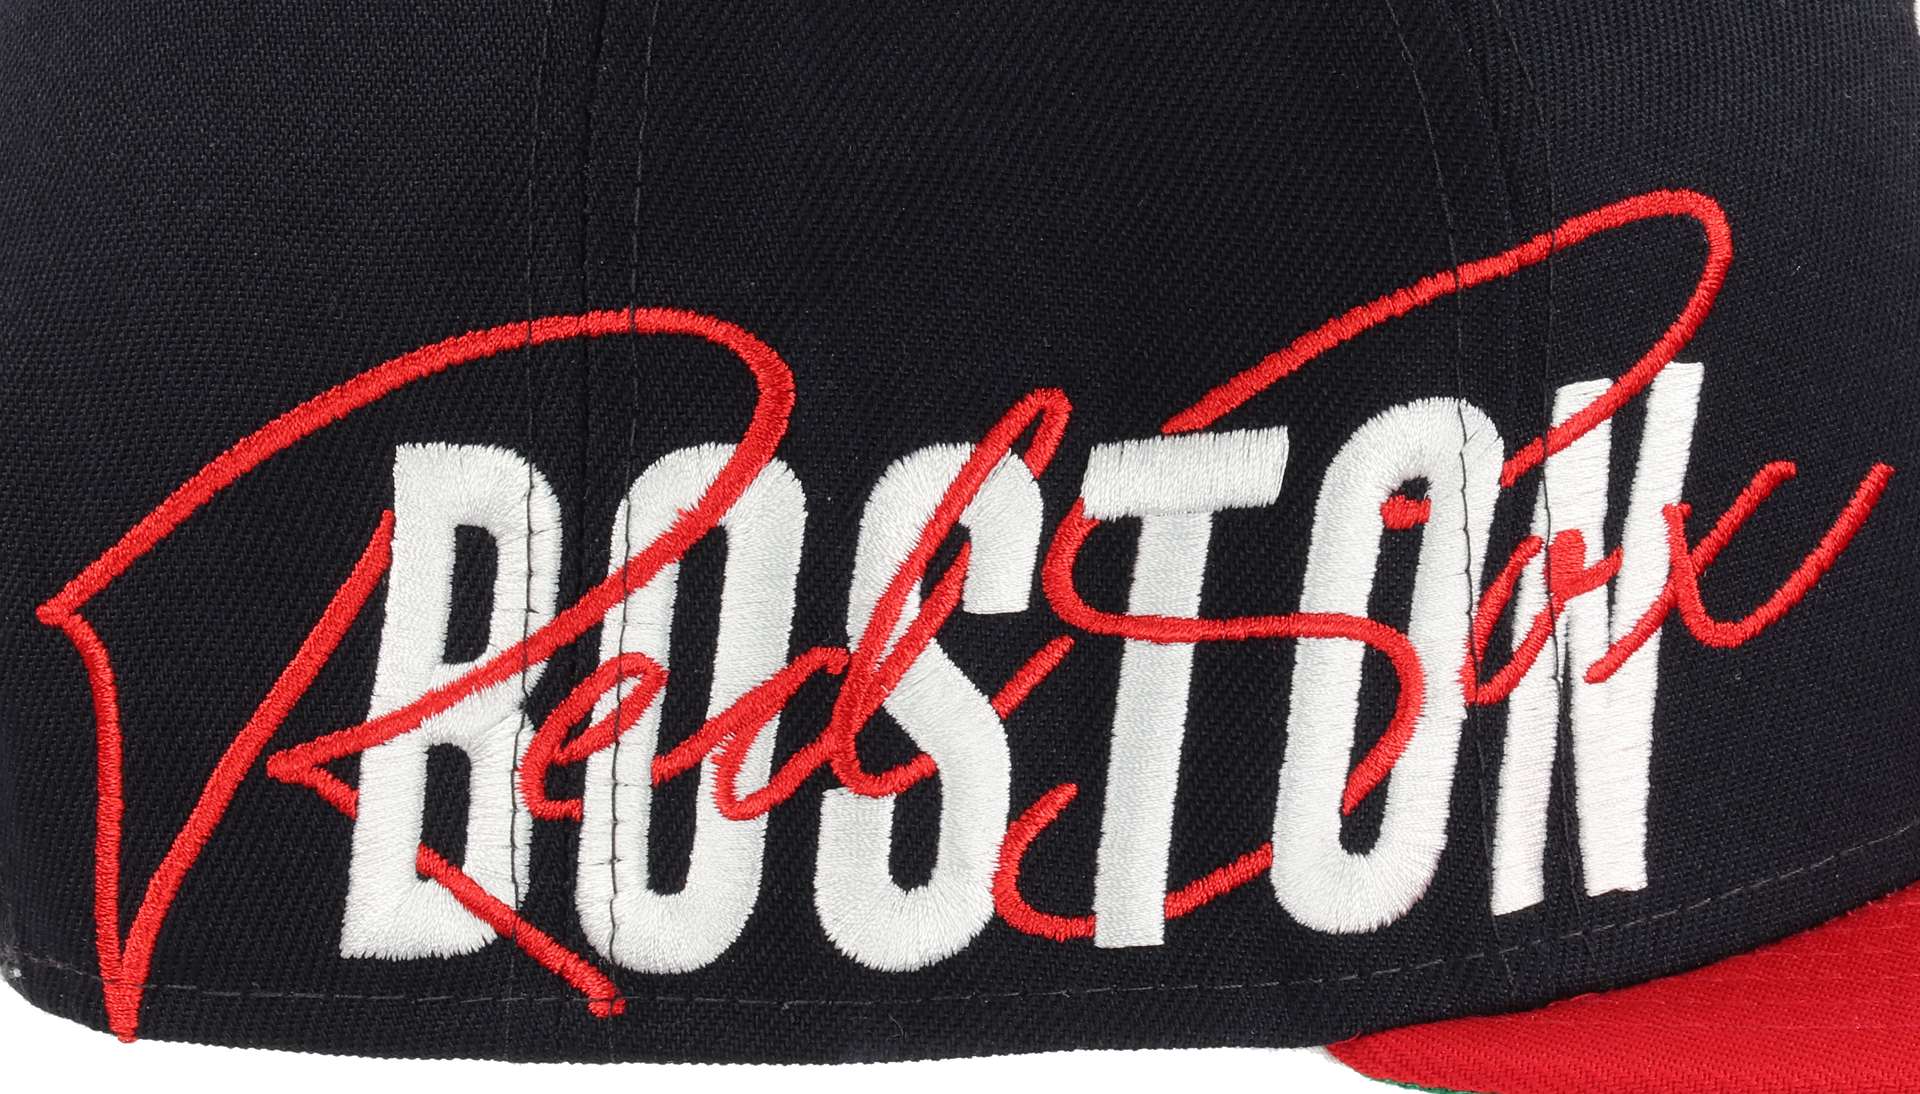 Boston Red Sox Sidefont Navy / Red 9Fifty Snapback Cap New Era